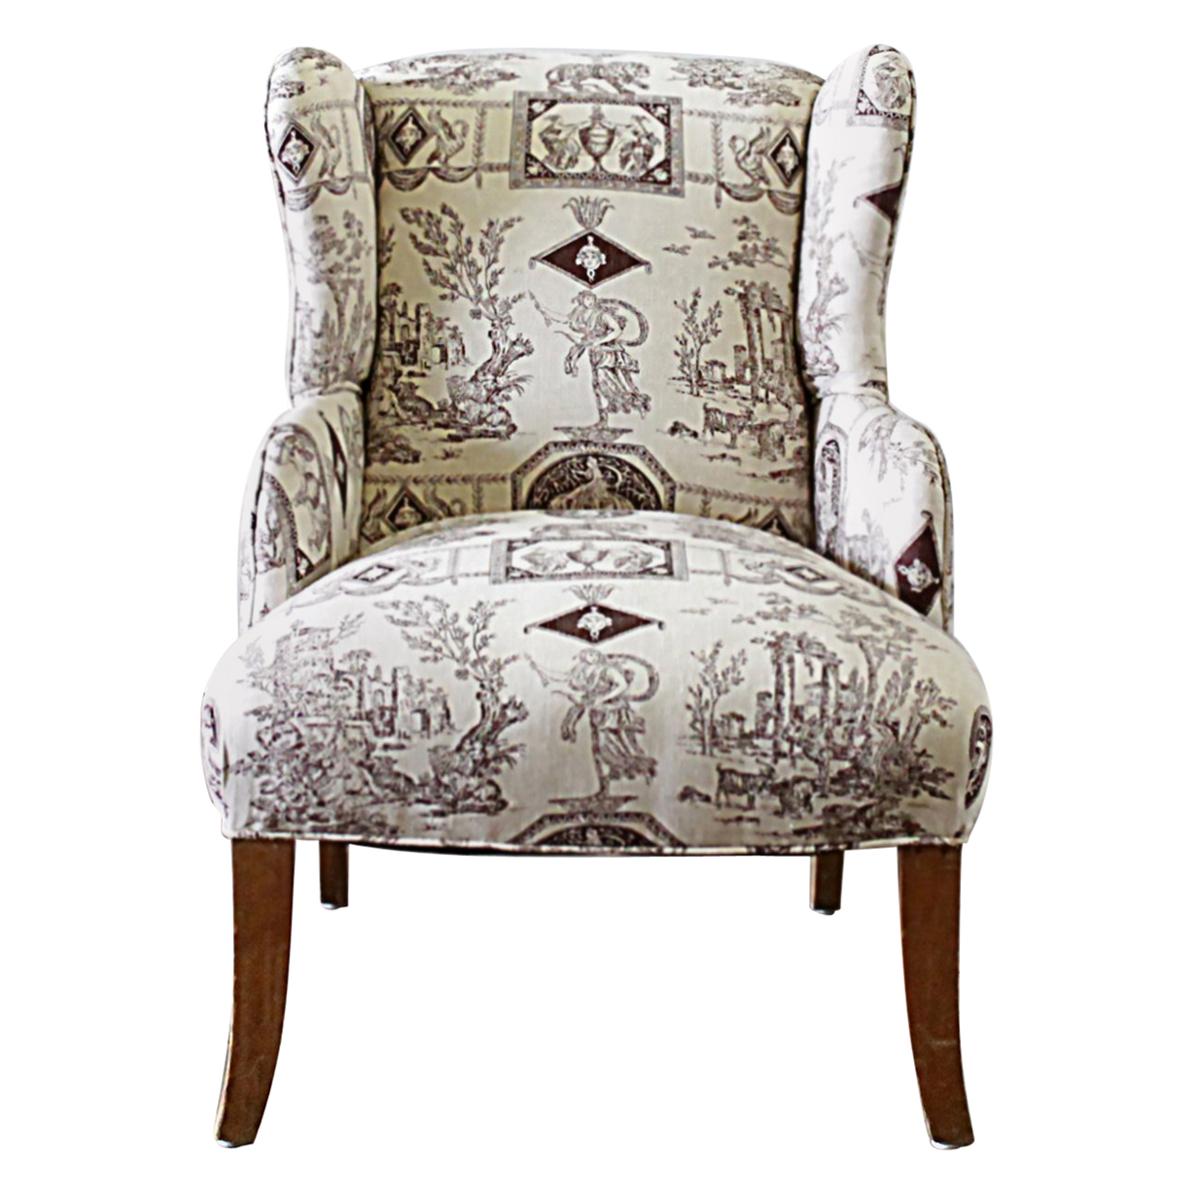 Vintage Petite Wing Chair Upholstered in Brown Toile Fabric